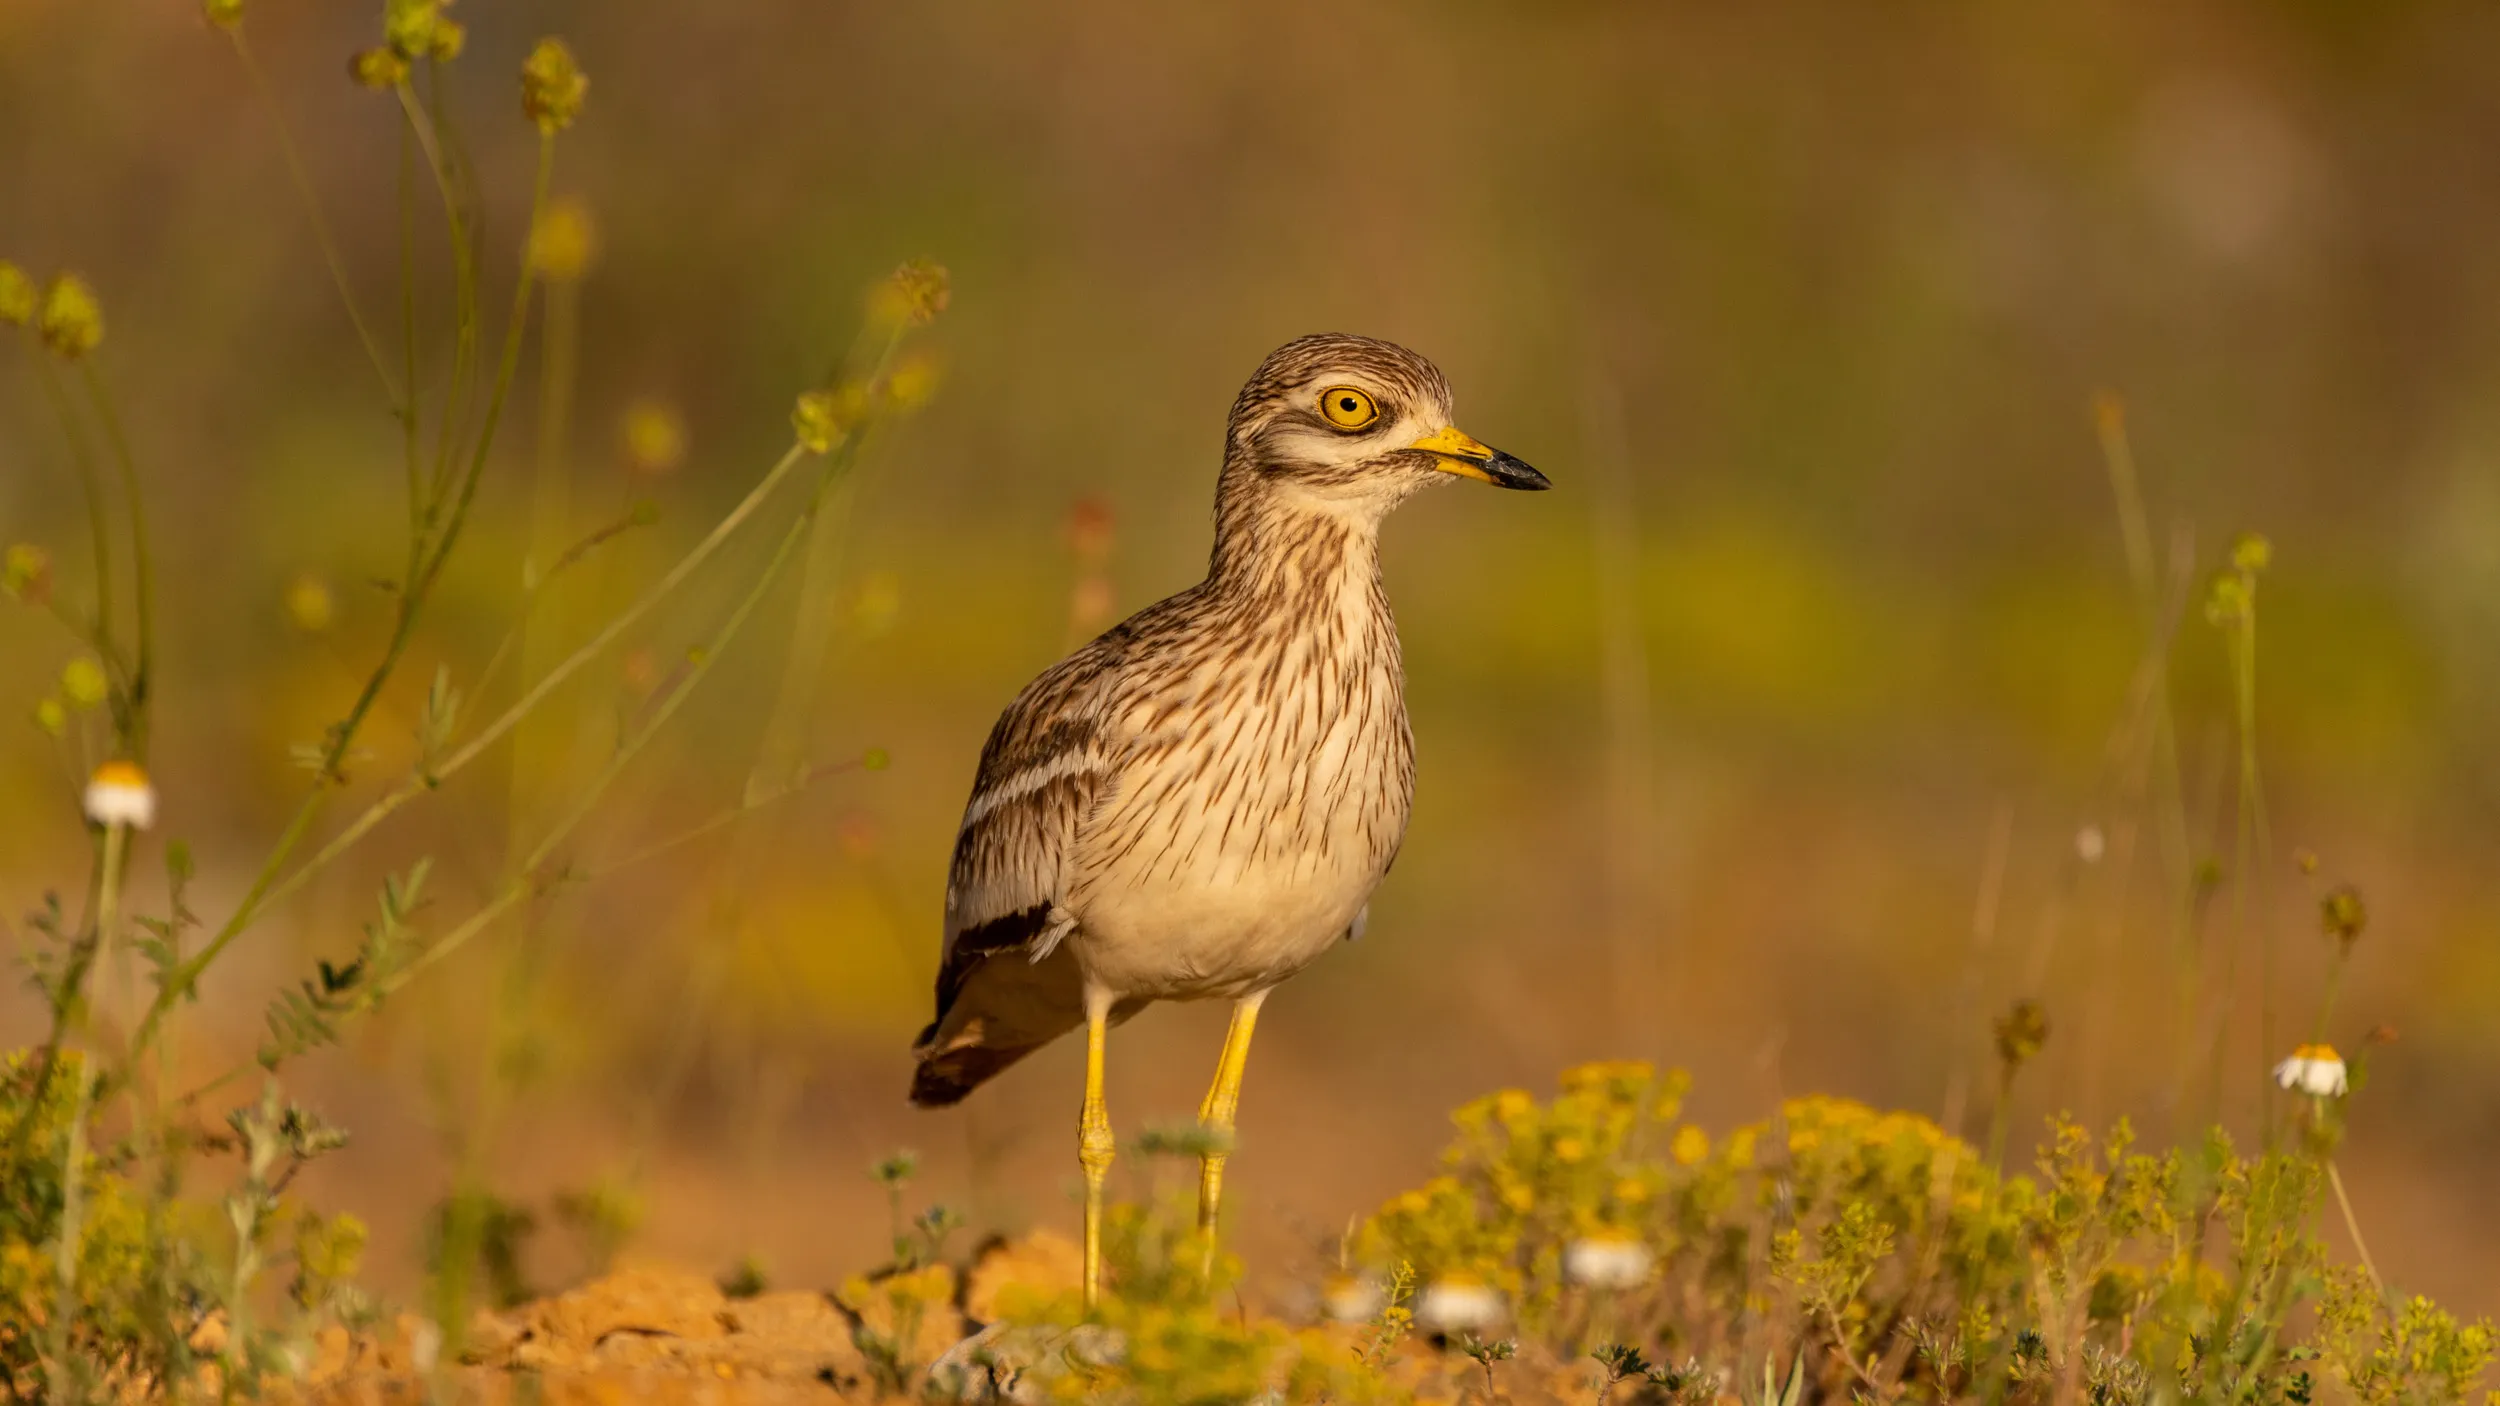 A Stone Curlew stood on grassland in golden light.